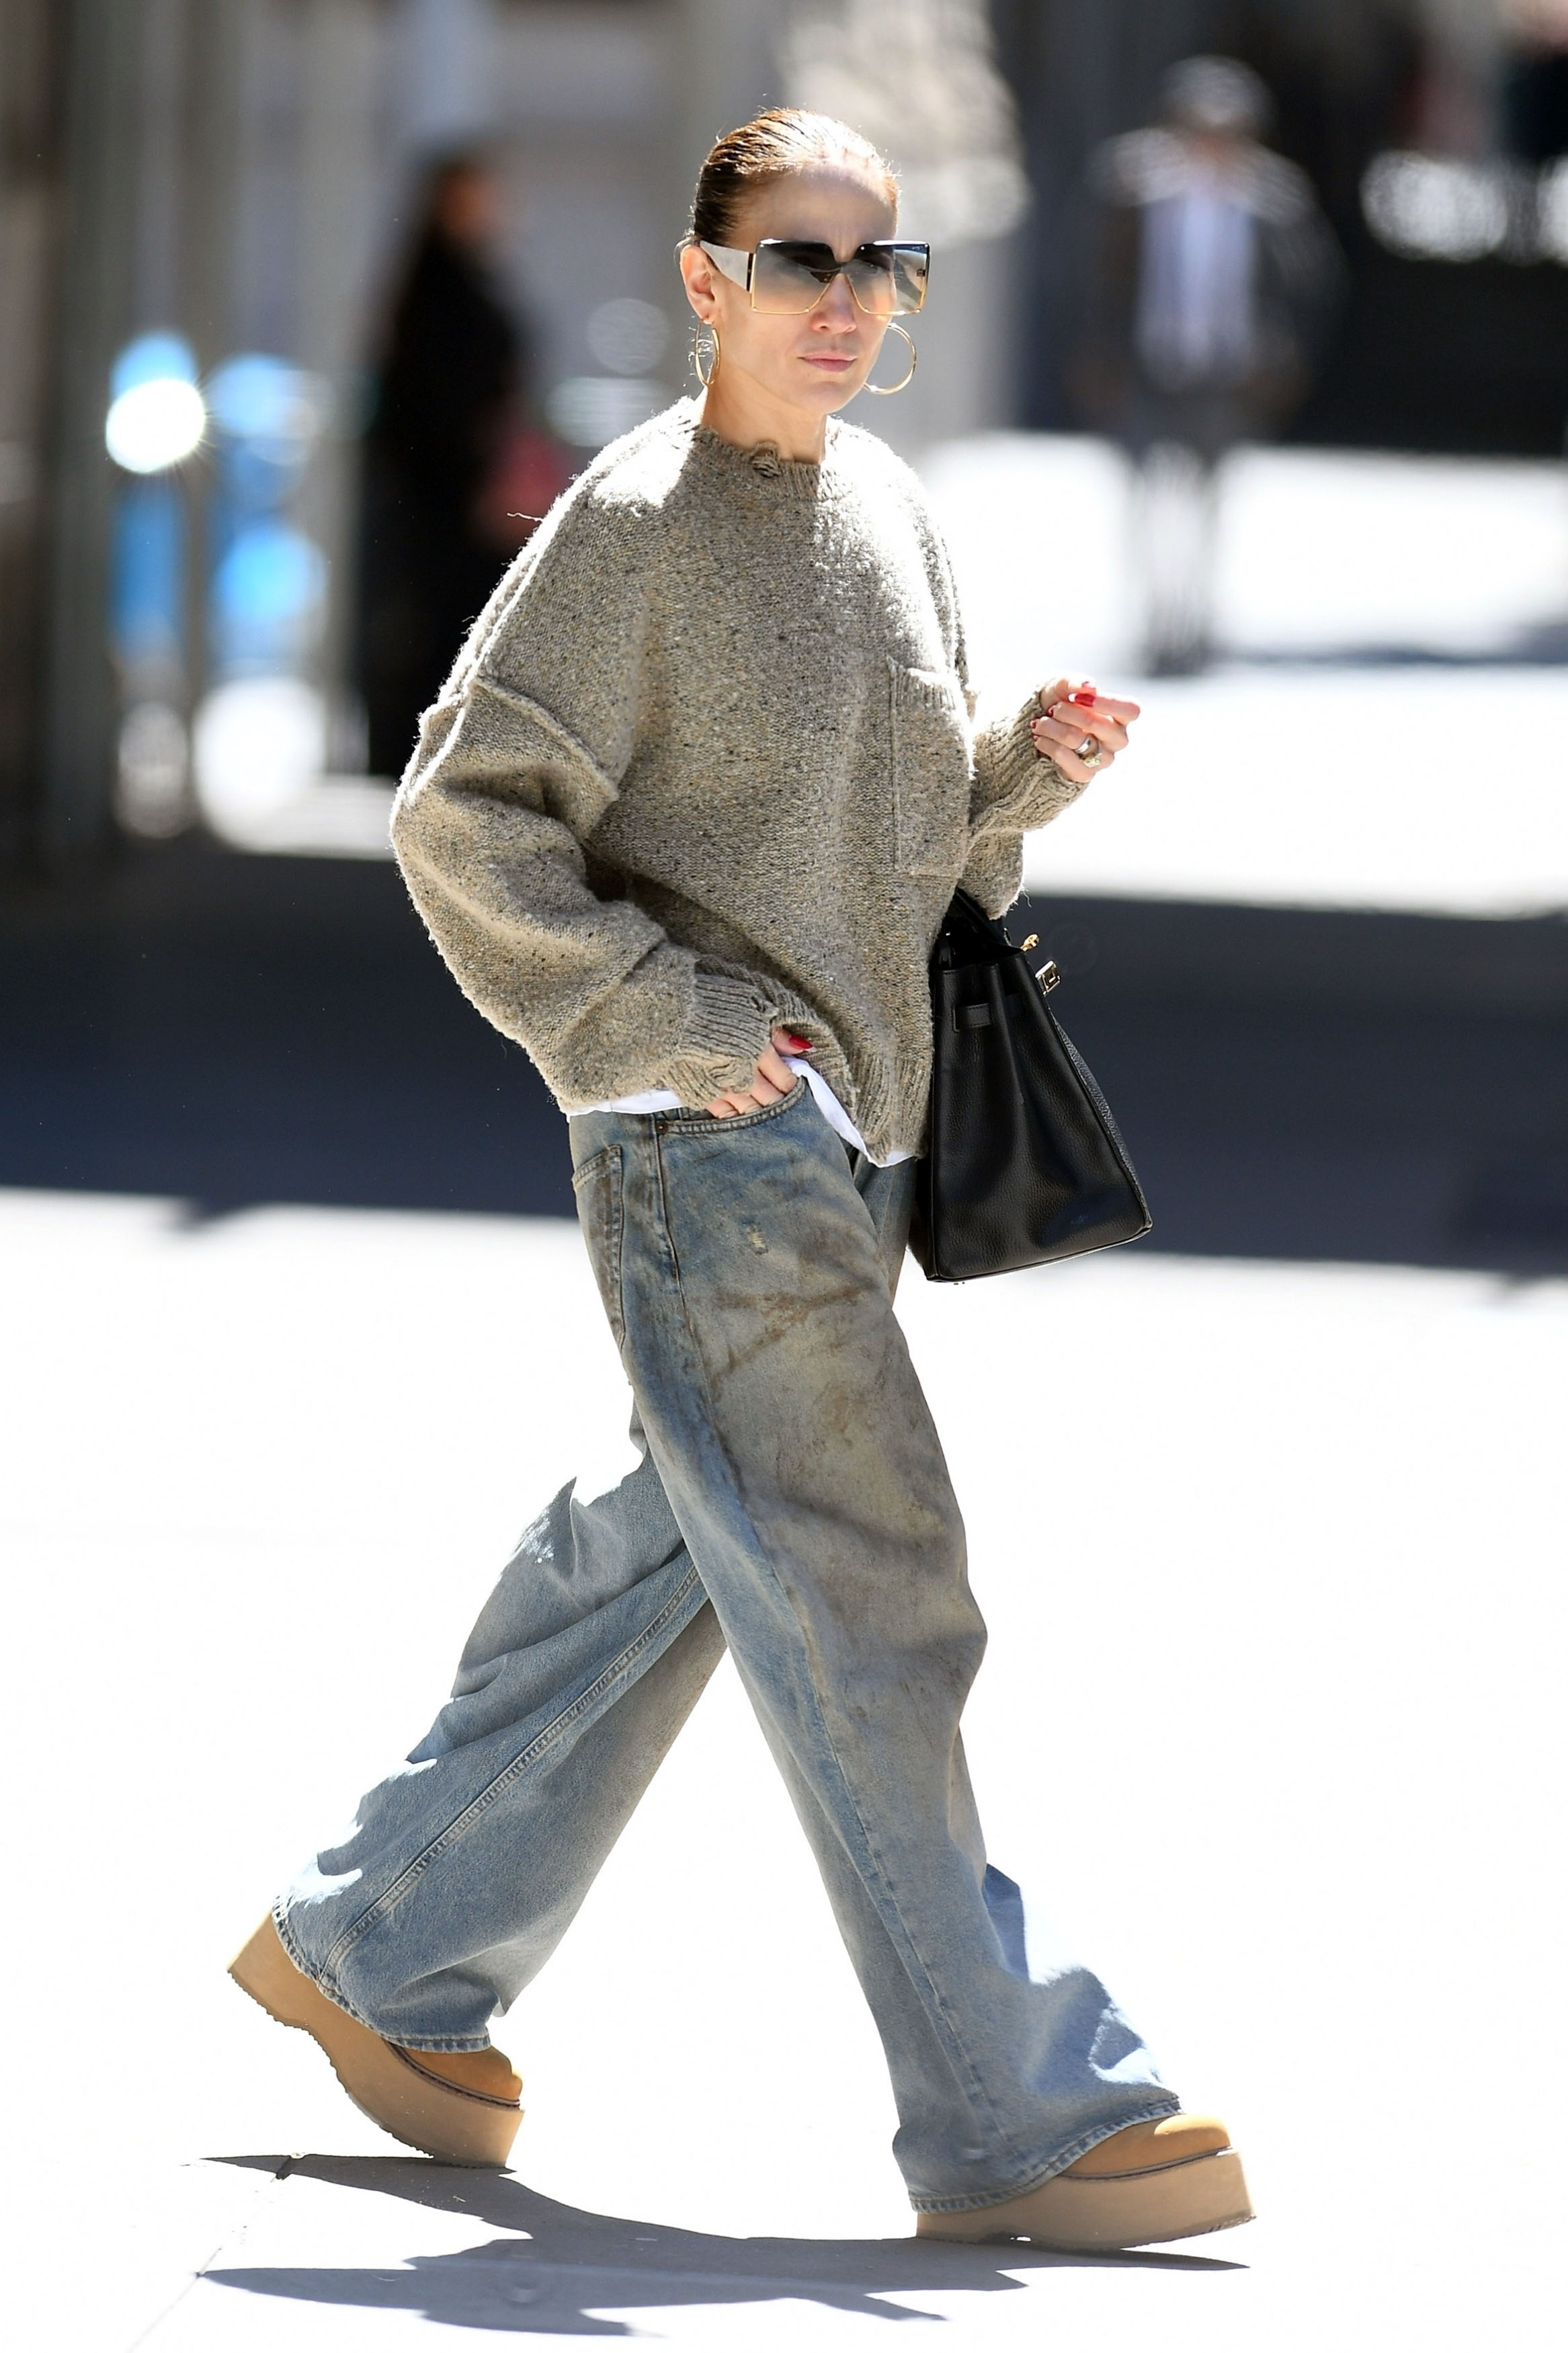 Jennifer Lopez walking on the streets of New York City wearing oversize sunglasses, a slouchy sweater, baggy dirty ACNE Studio jeans, and  R13 double-stack lace-up boots.